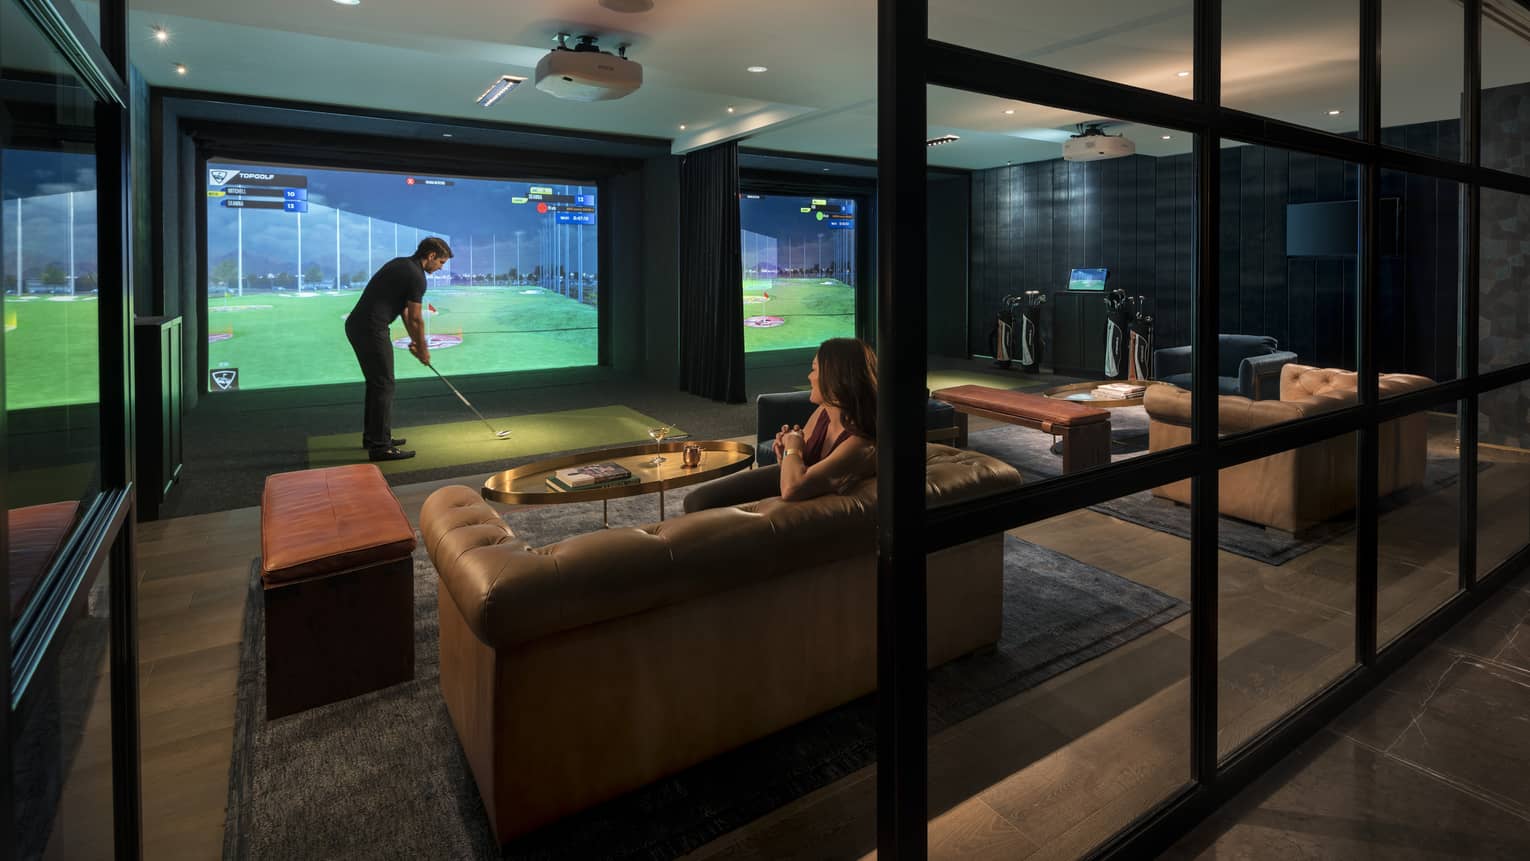 A man uses an indoor golf simulator while a woman watches from a nearby couch